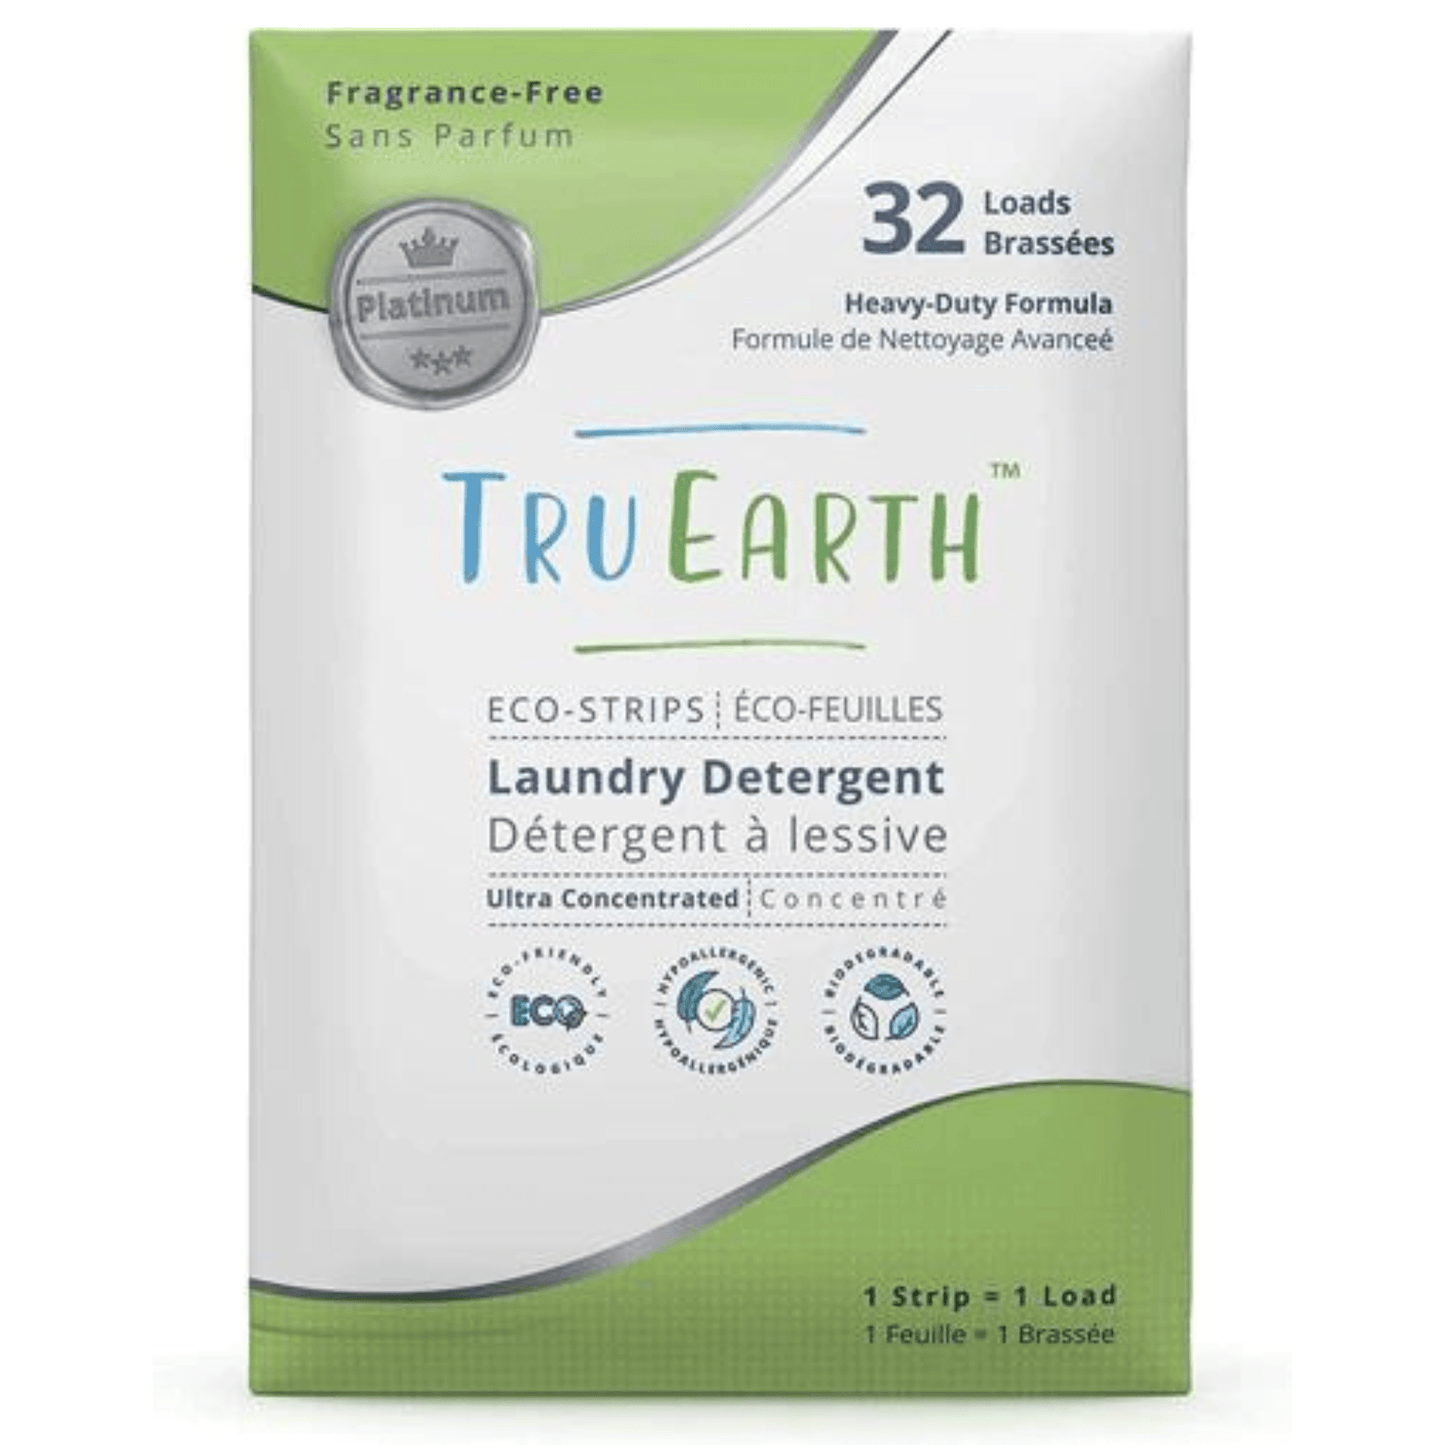 Primary Image of Eco-strips Fragrance Free Laundry Detergent